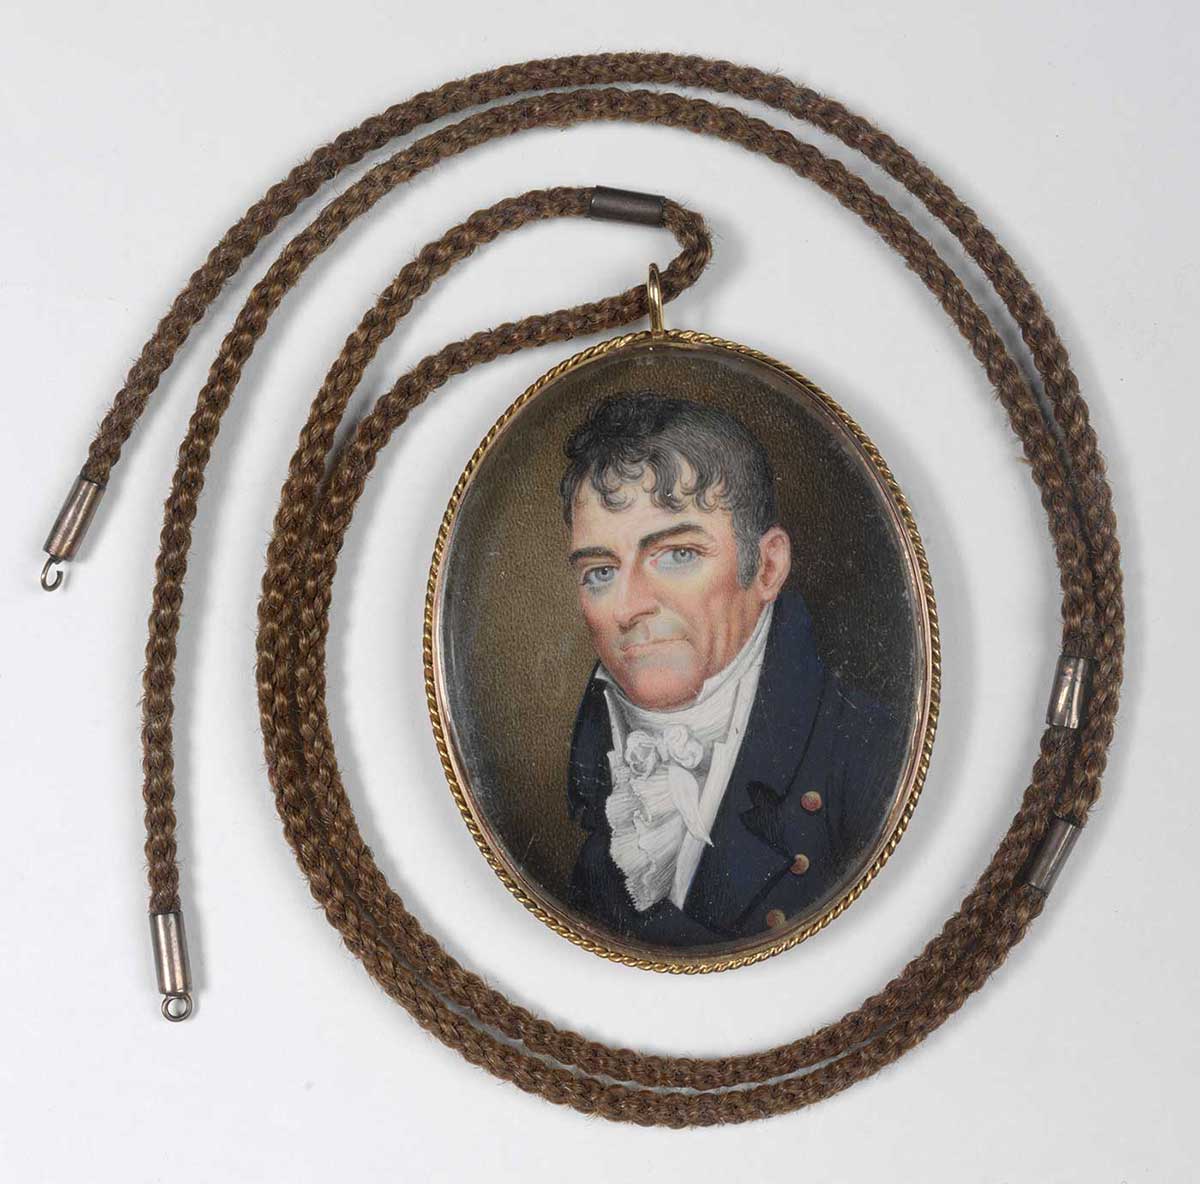 Miniature portrait with necklace attached. The portrait depicts a man wearing a blue coat and a flouncy cravat. He has blue eyes and black wavy hair. - click to view larger image